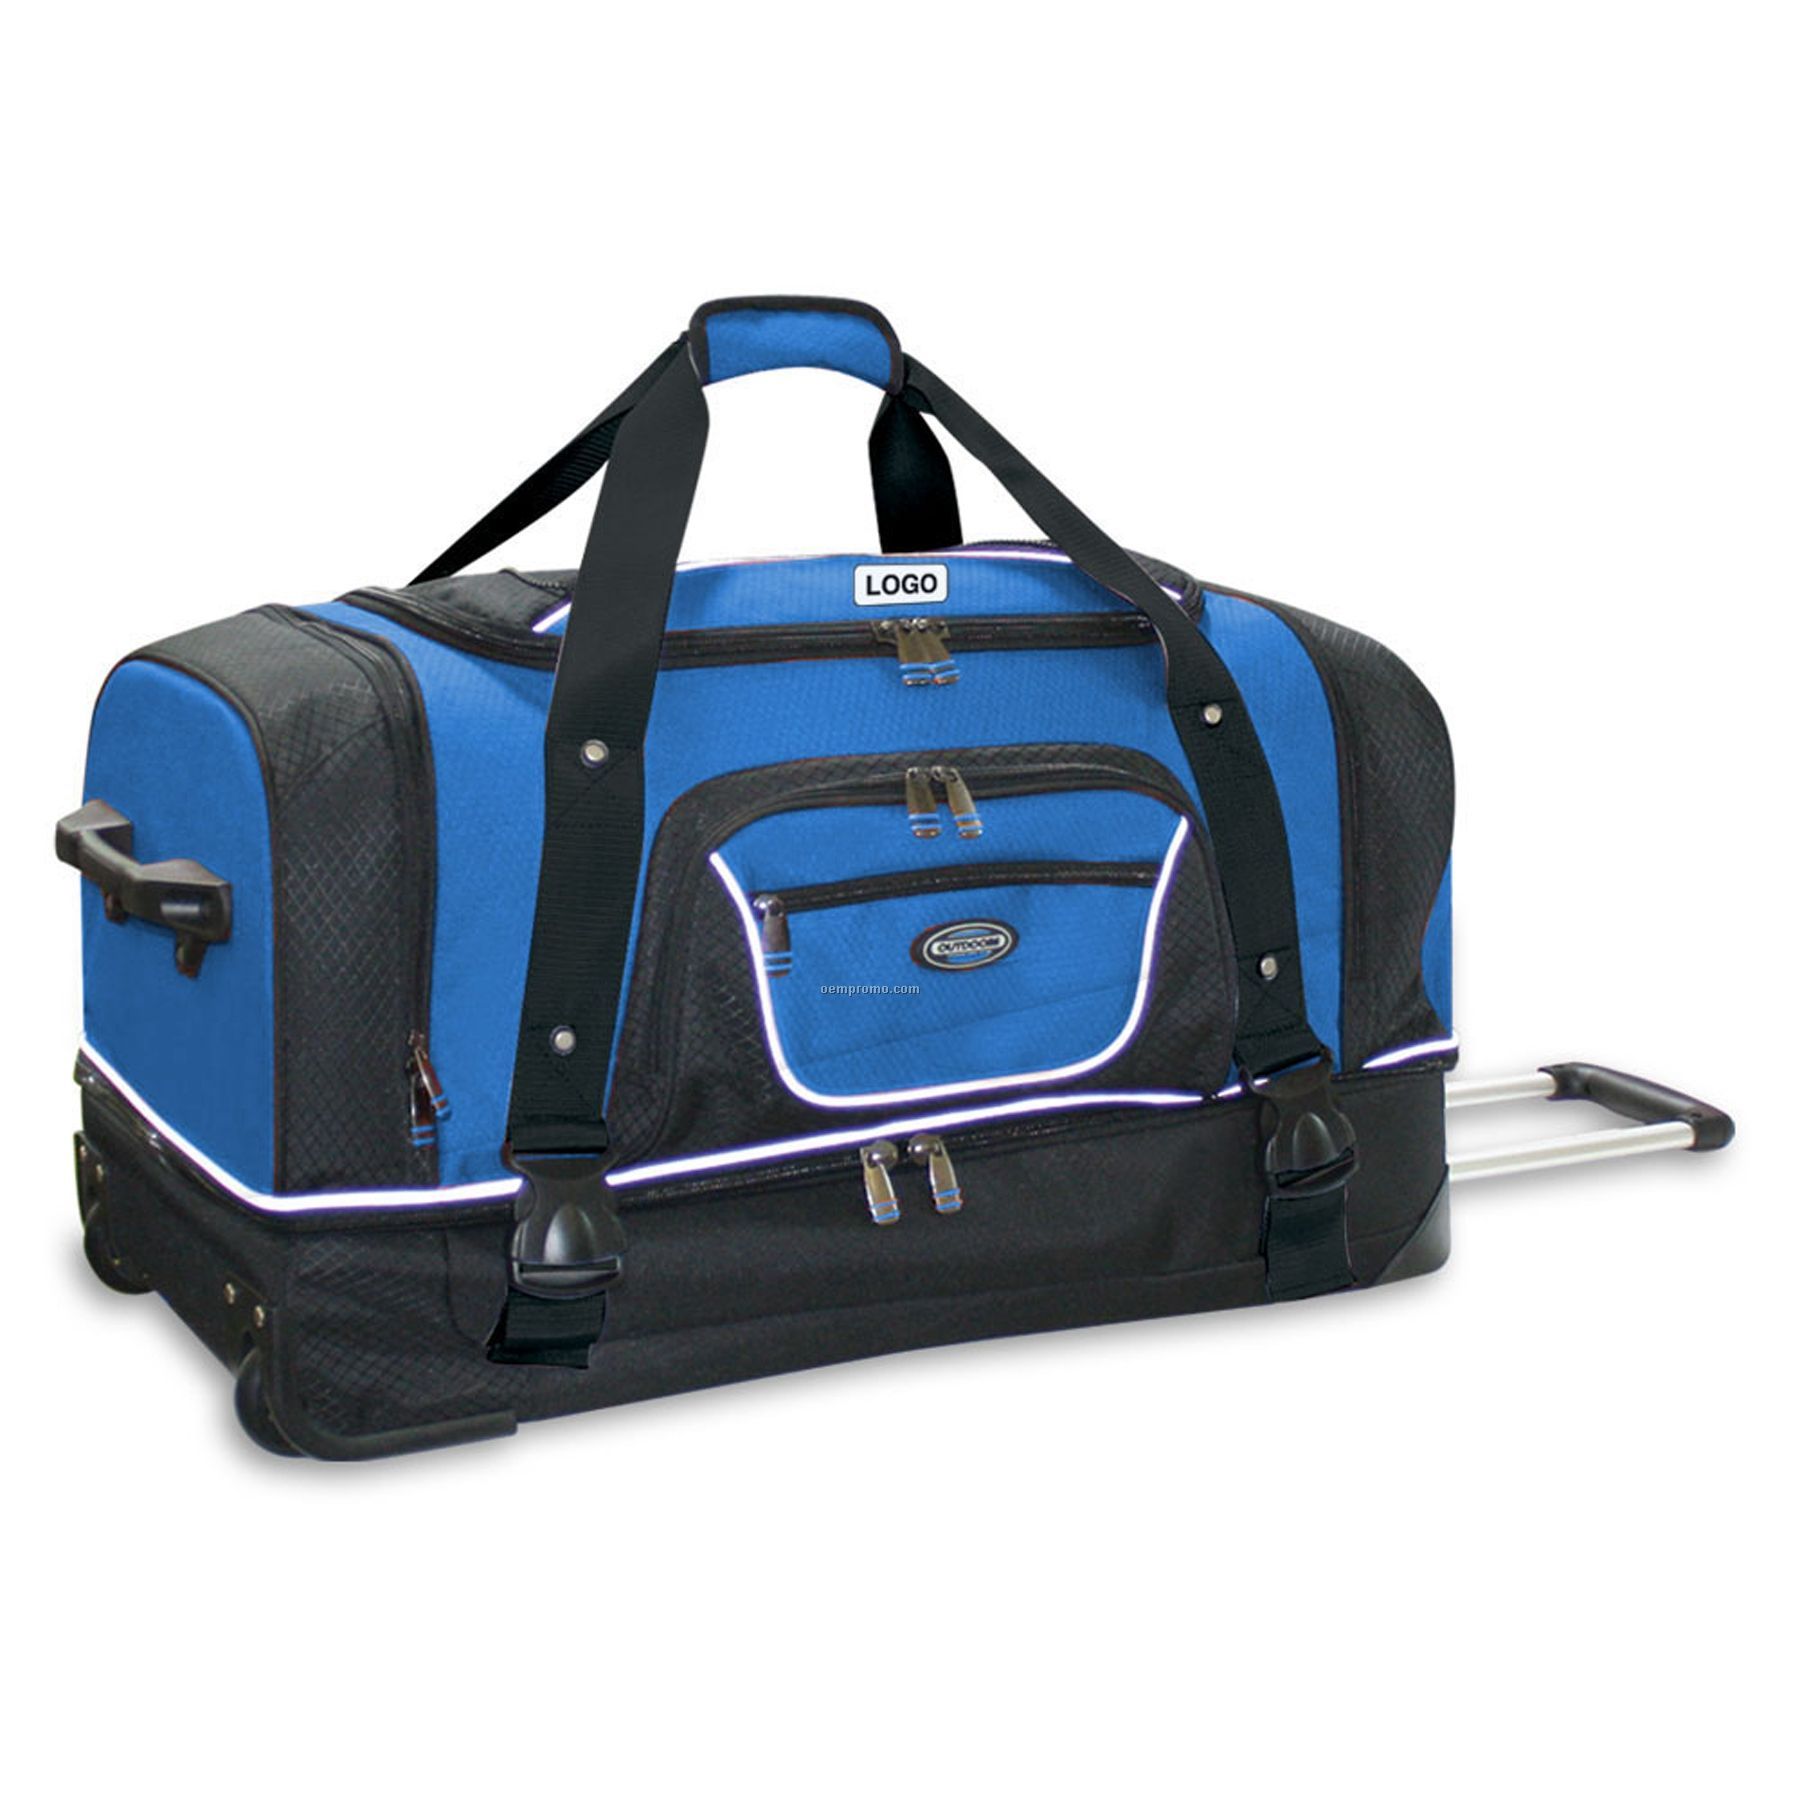 Expedition II Collection 30" 2 Section Wheel Outdoor Duffel Bags